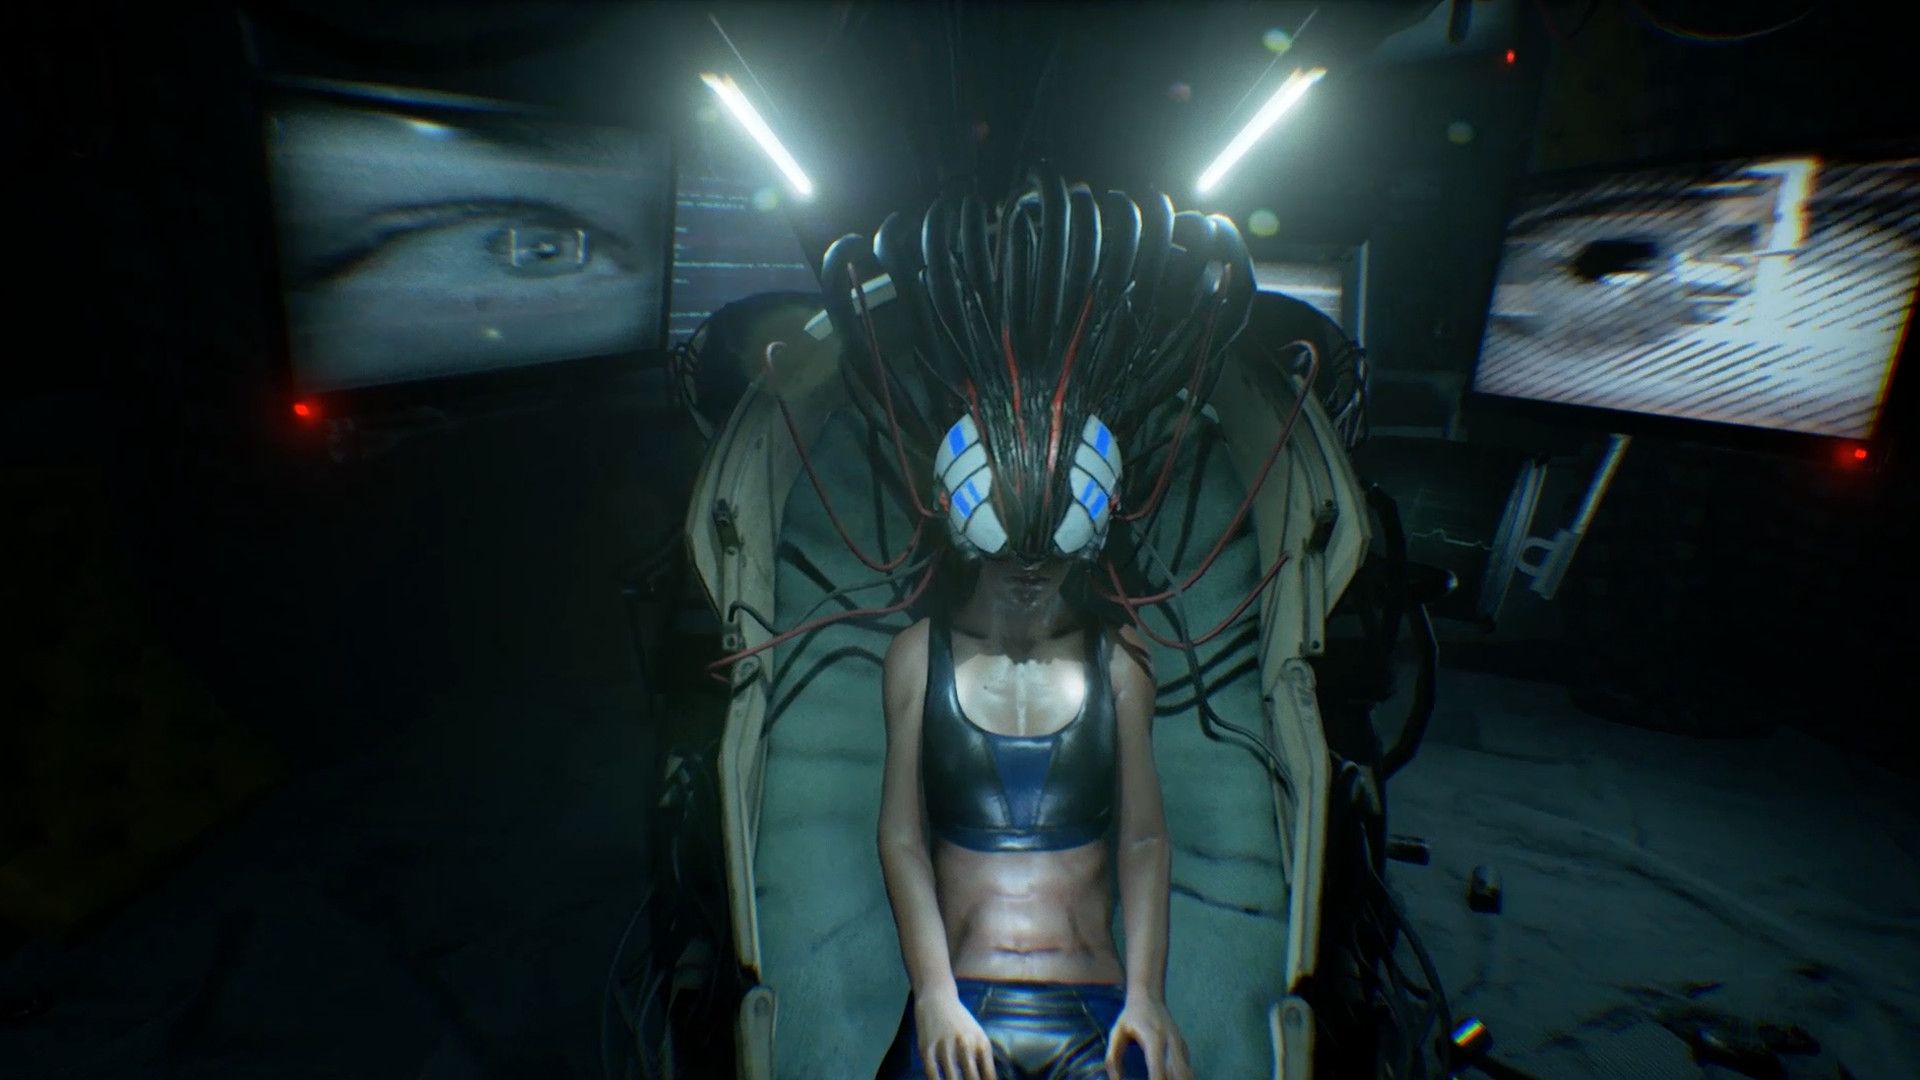 Observer jacks in for another cyberpunk nightmare on PS5 and Xbox Series X